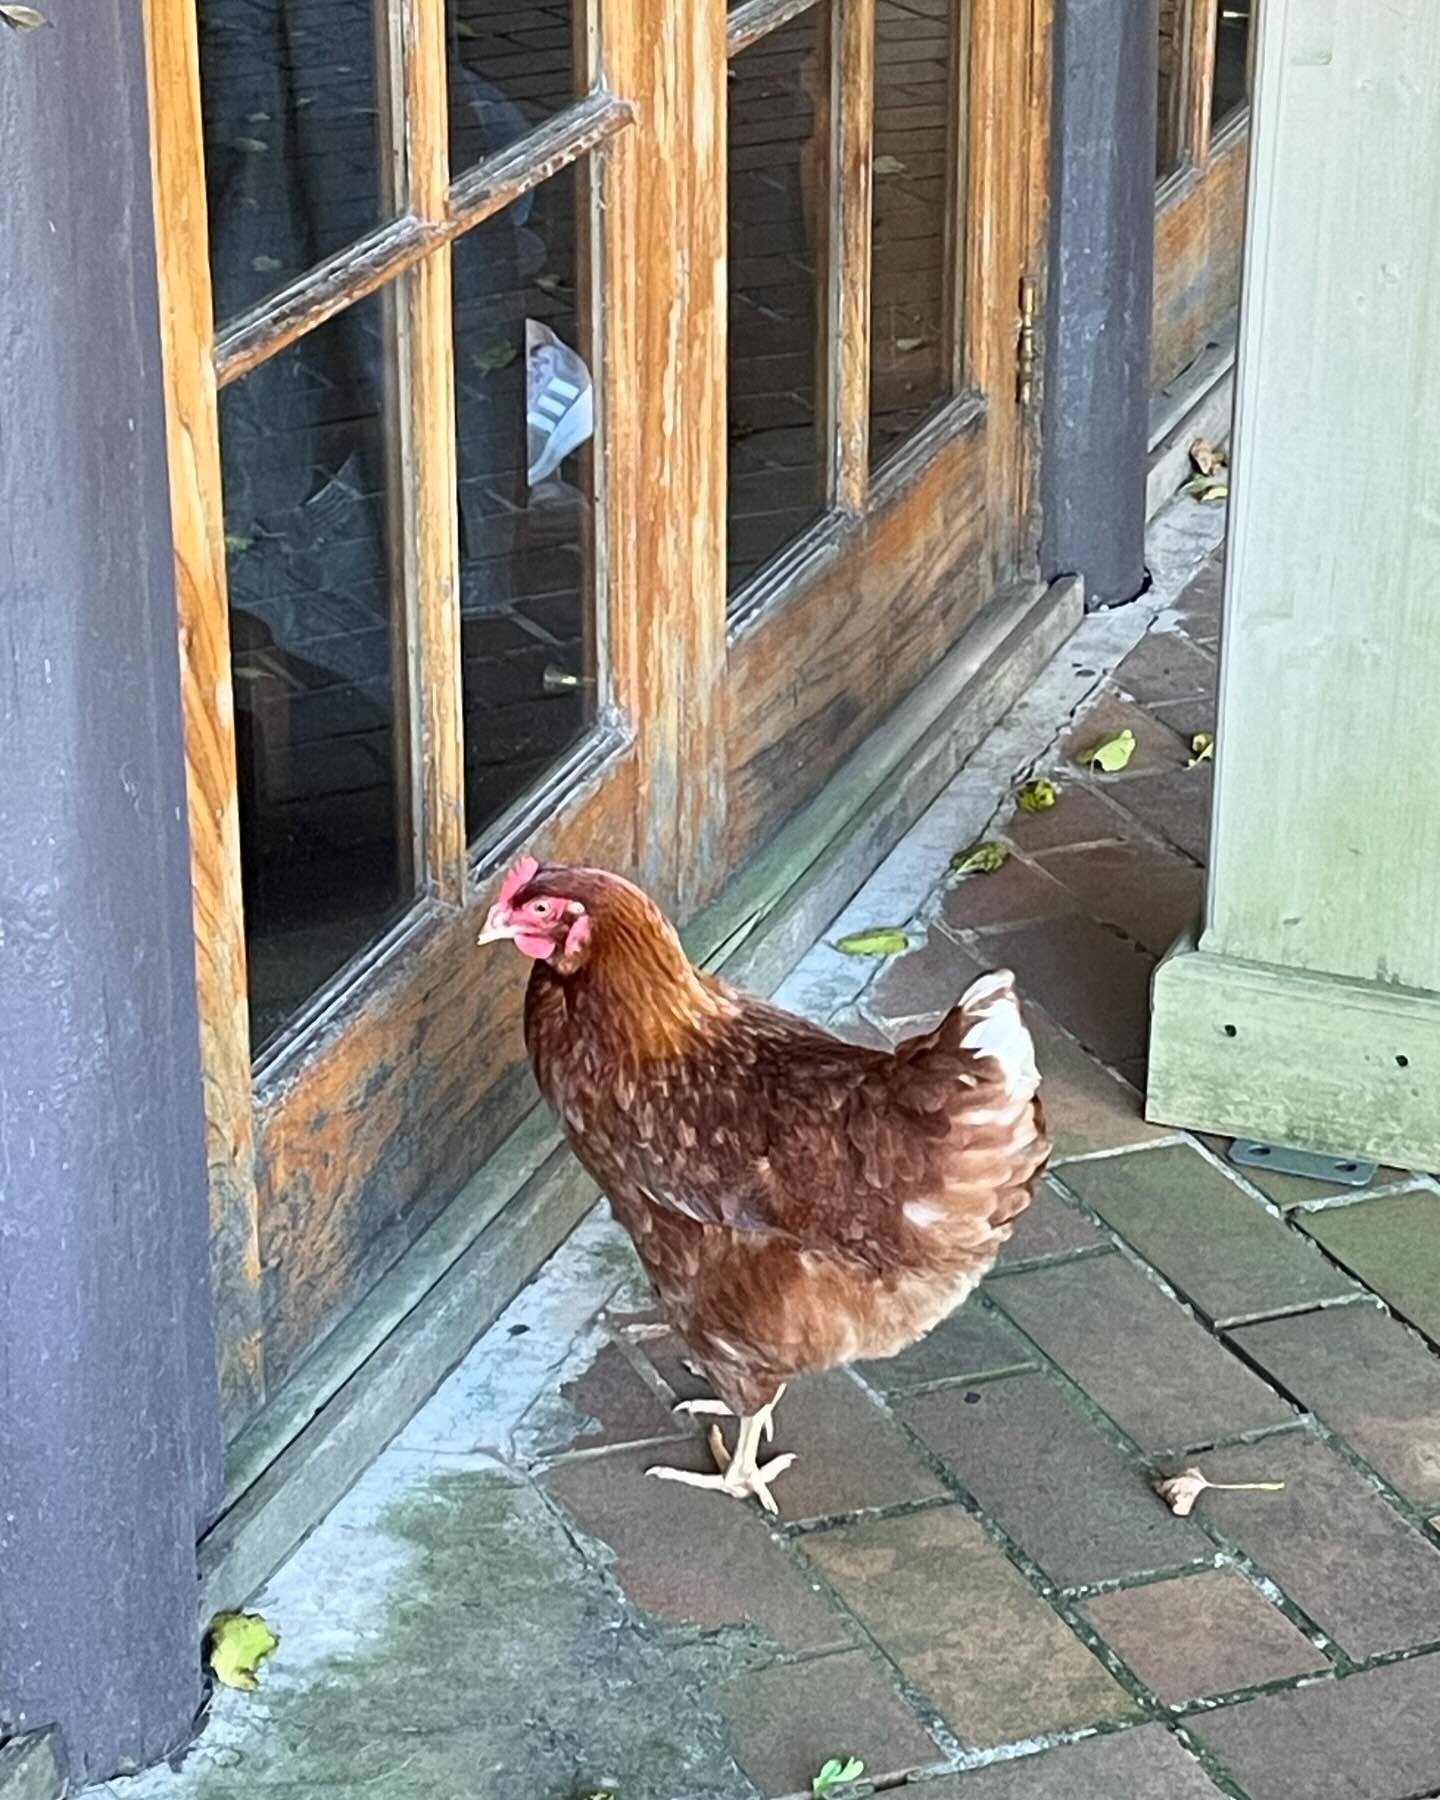 Why did the chicken cross the road?

&hellip;to come to Kelly&rsquo;s 🐔 

In all seriousness, if anyone is missing a chicken this one has been hanging around with us all day